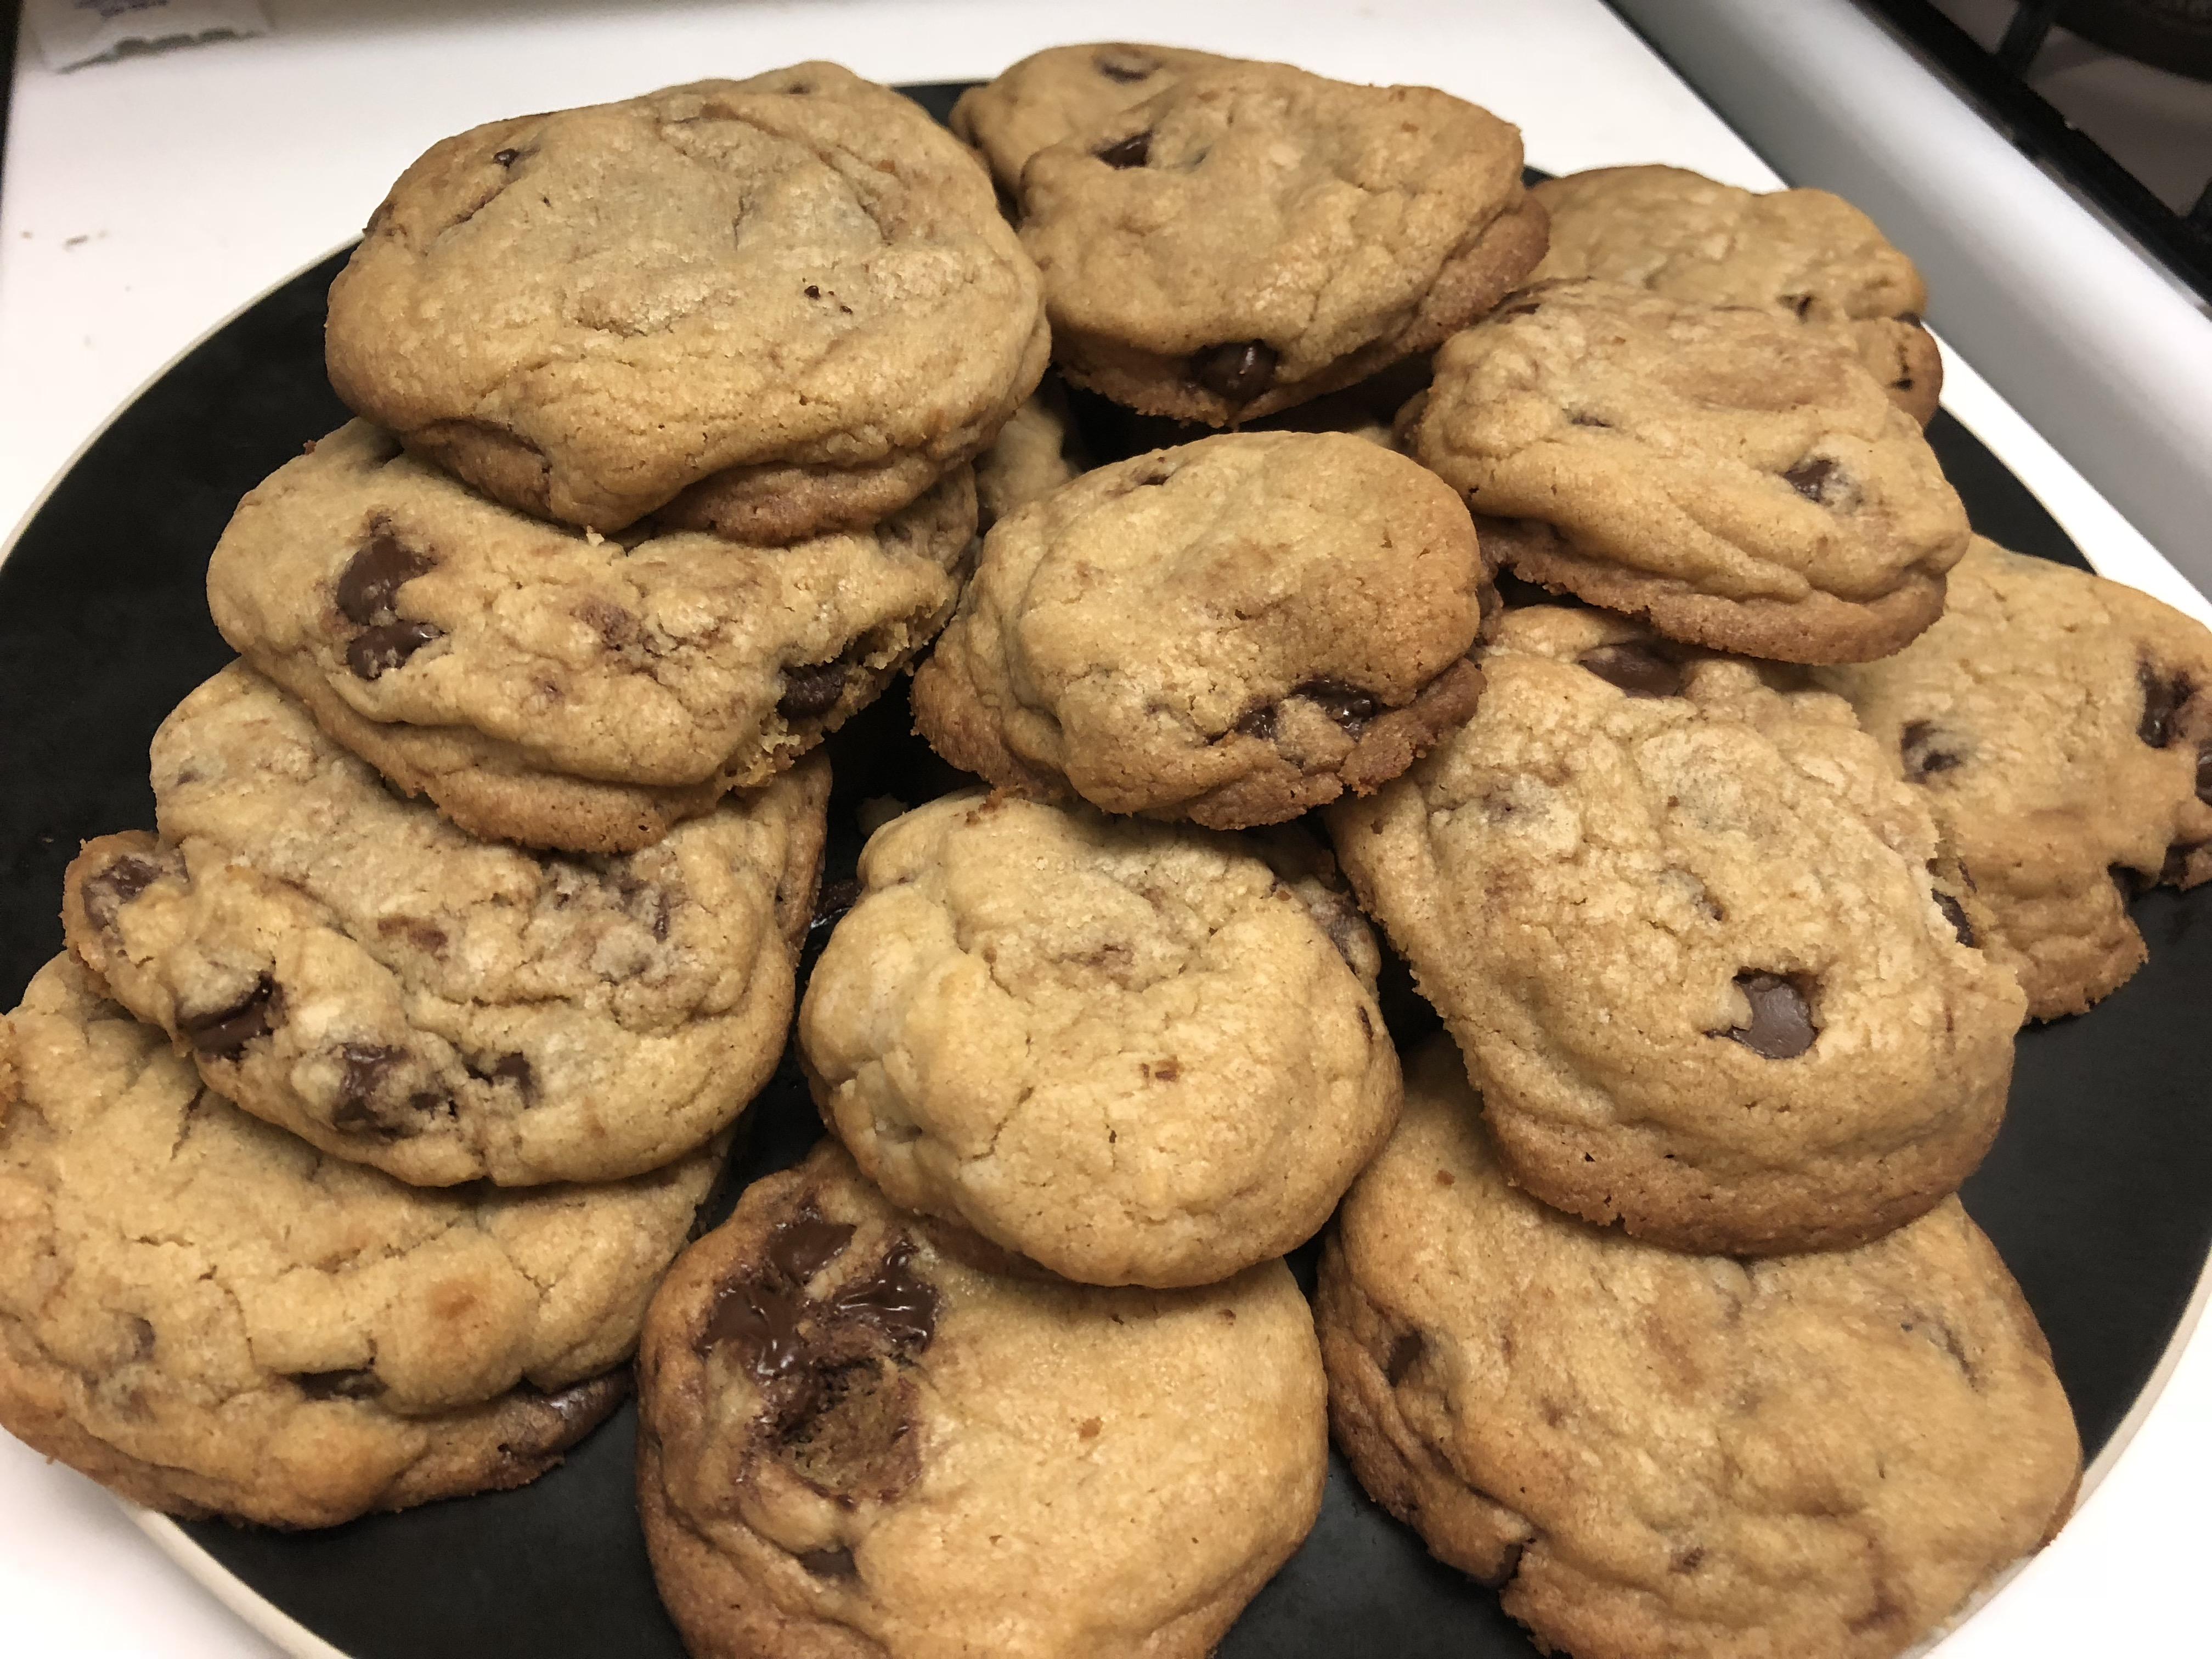 Homemade cookies using Cook's Illustrated “Perfect Chocolate Chip ...